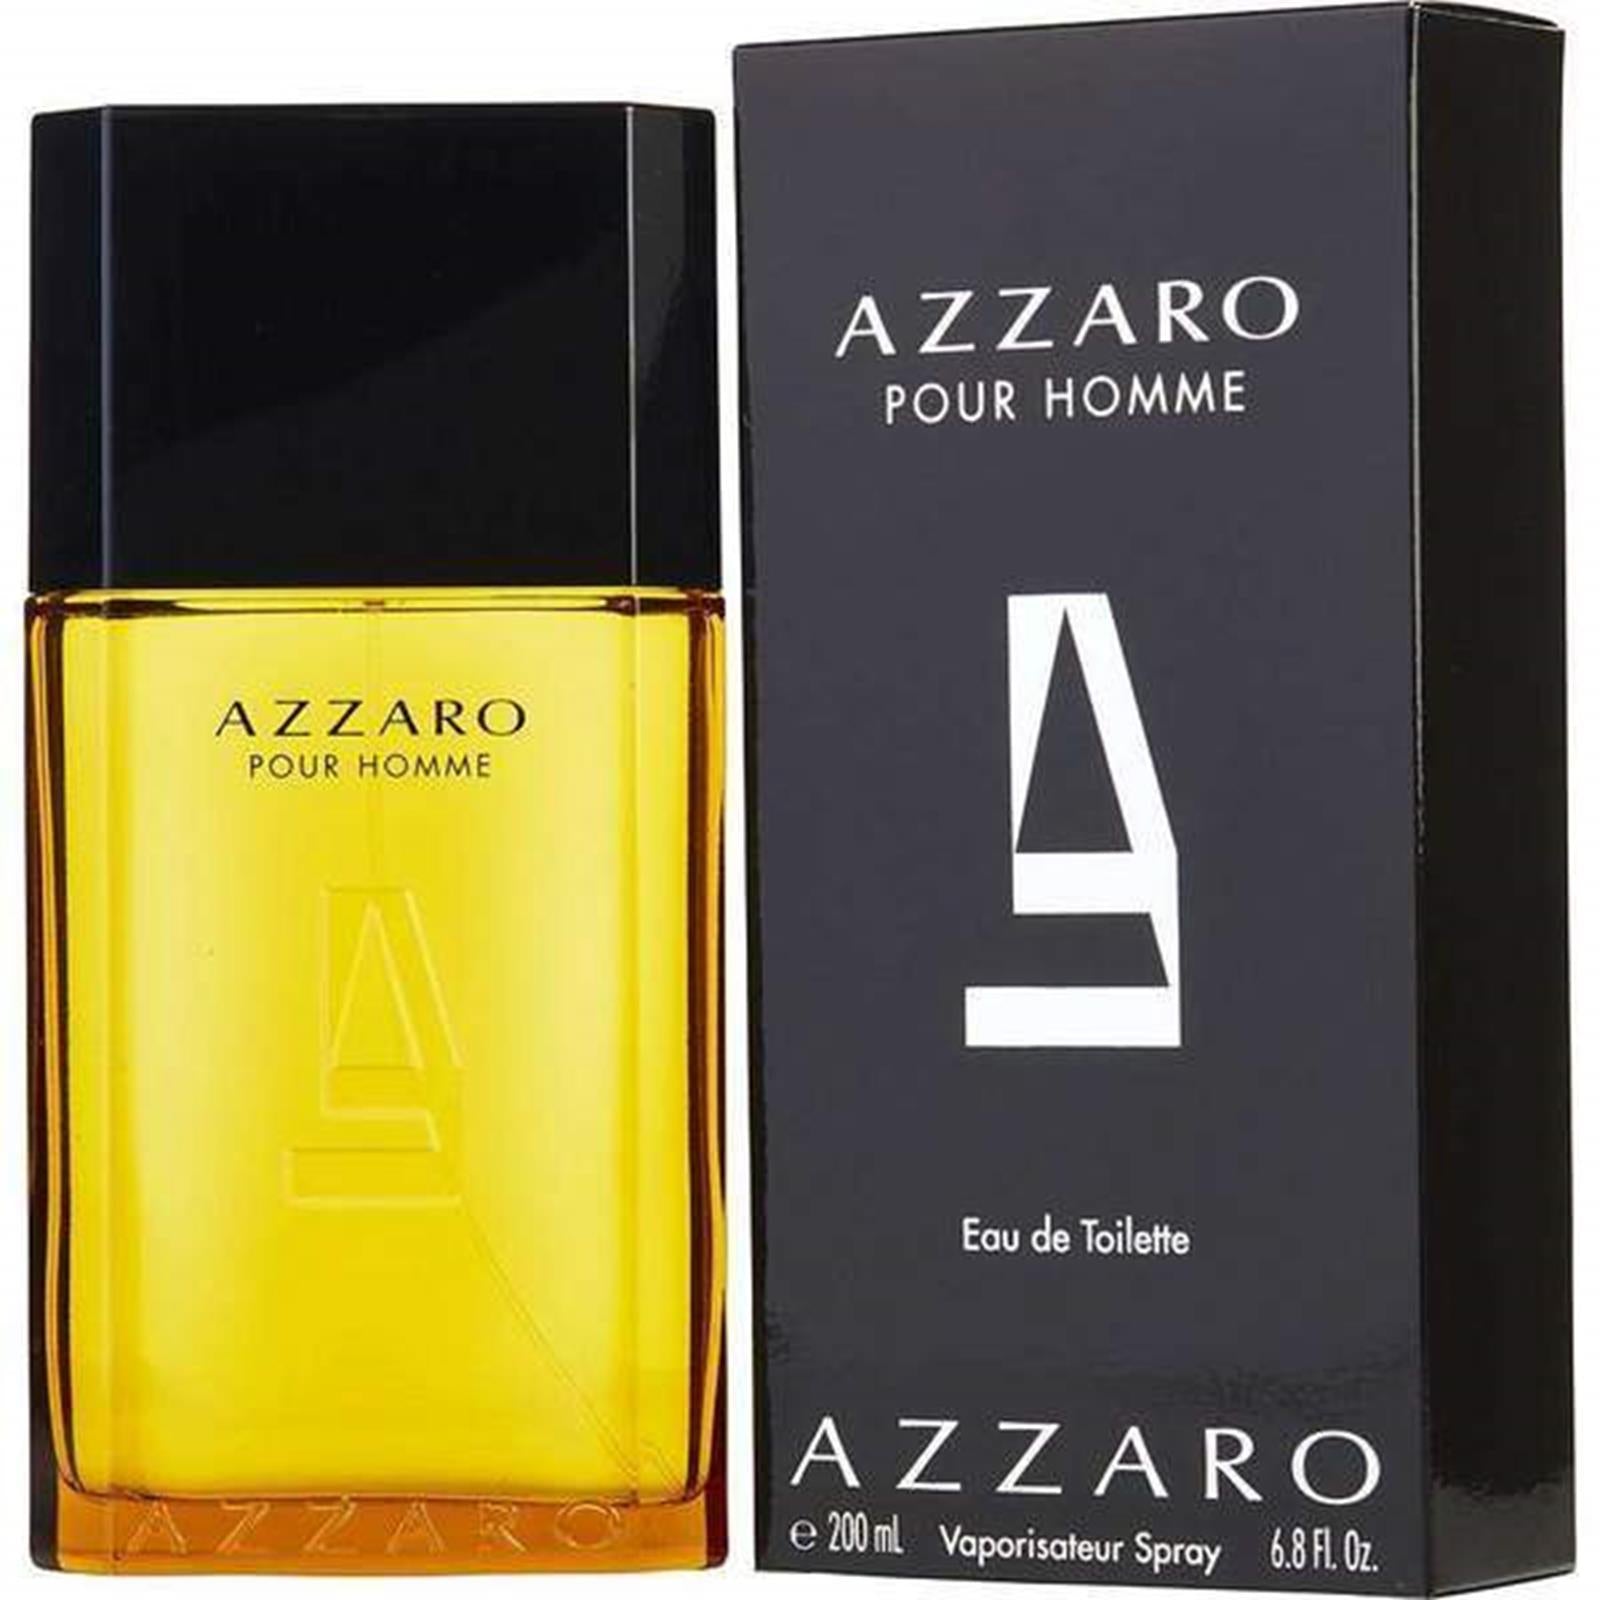 Azzaro Pour Homme Starting at $28.00 – Parfum MM